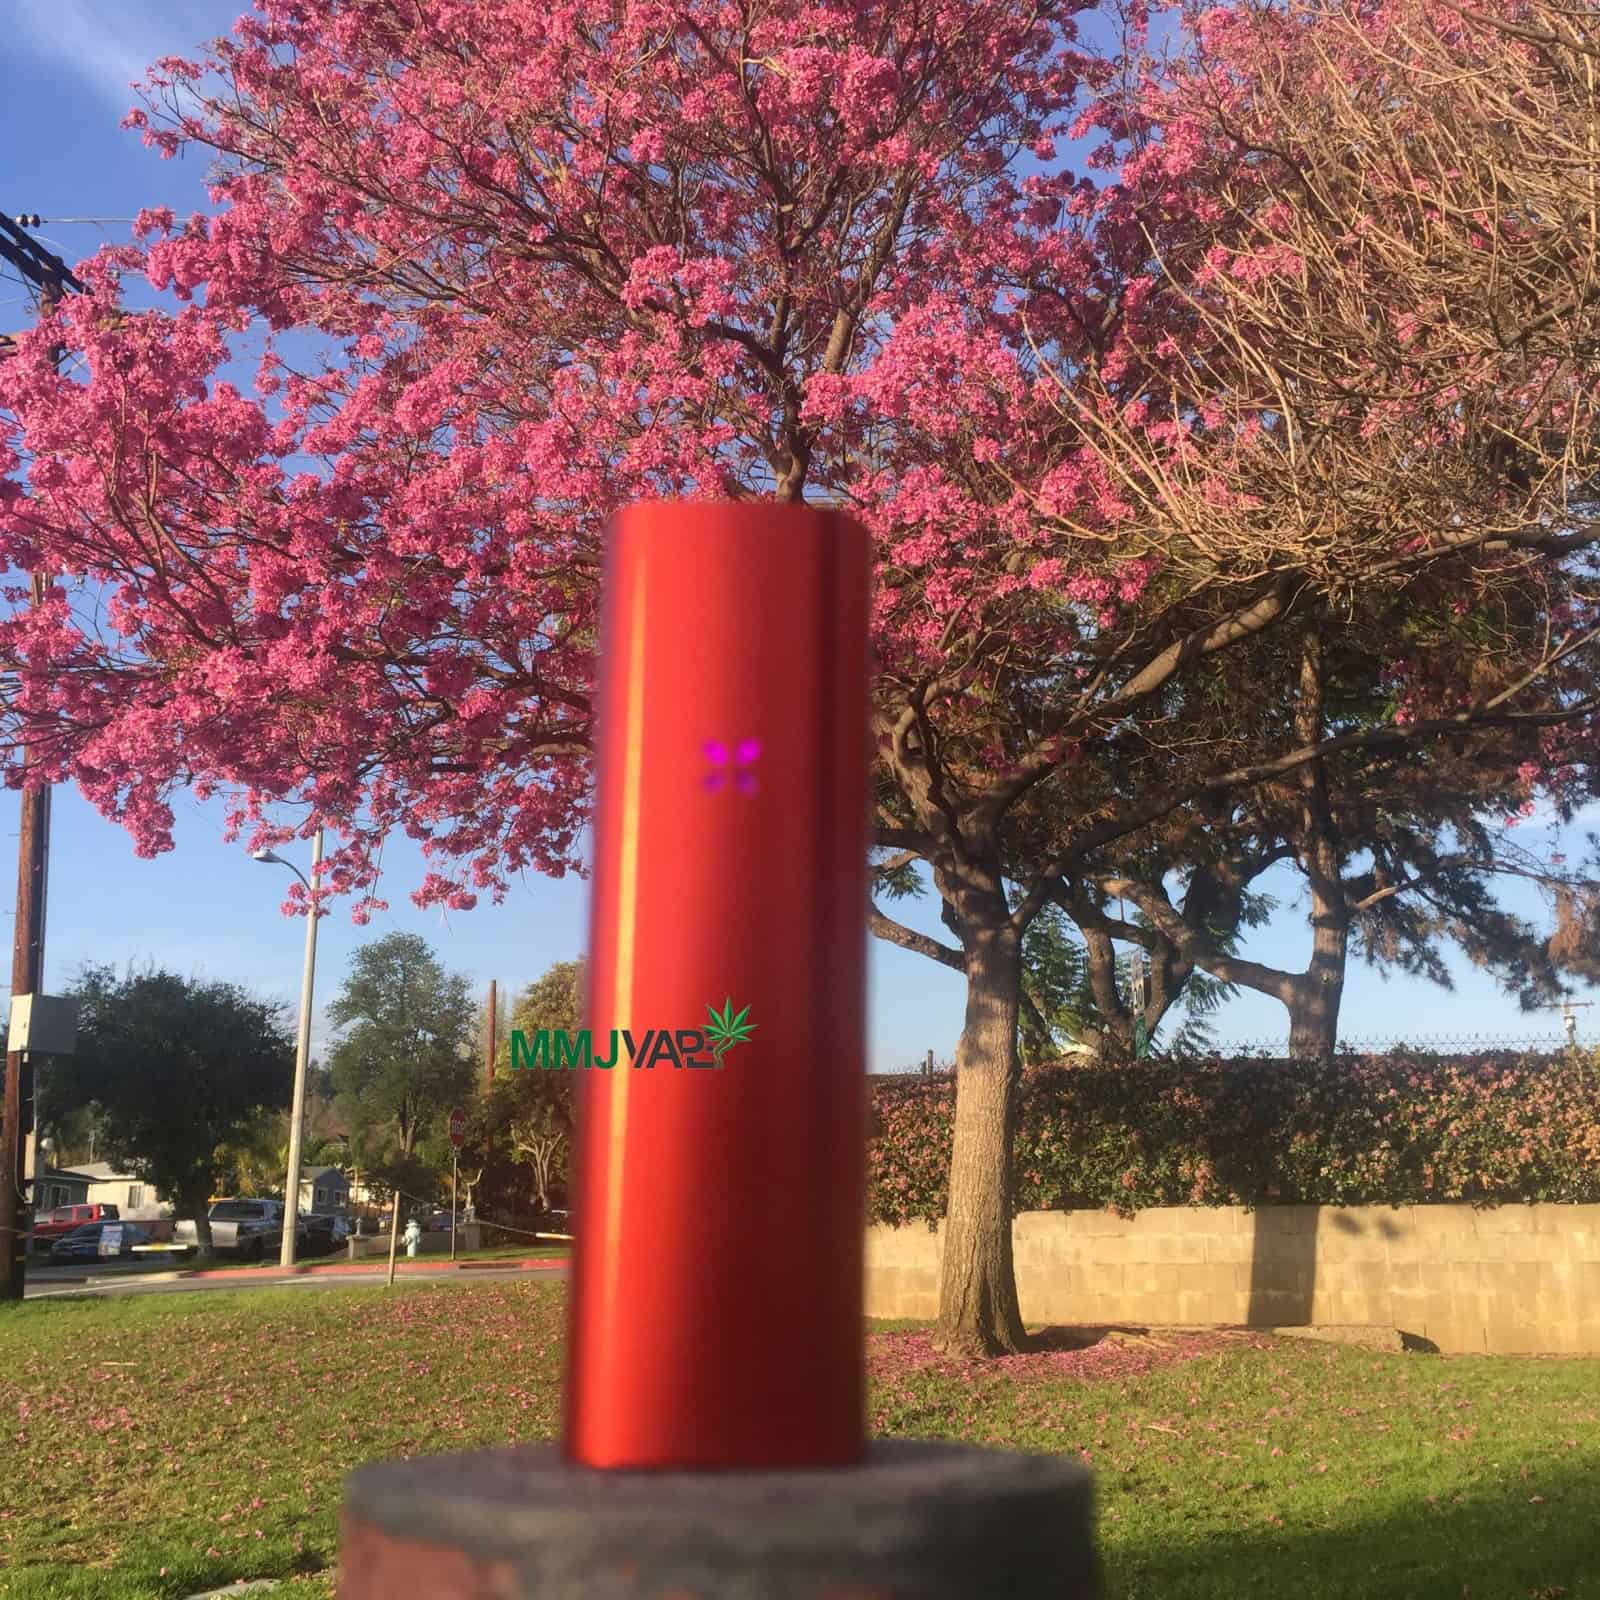 Pax 2 Review